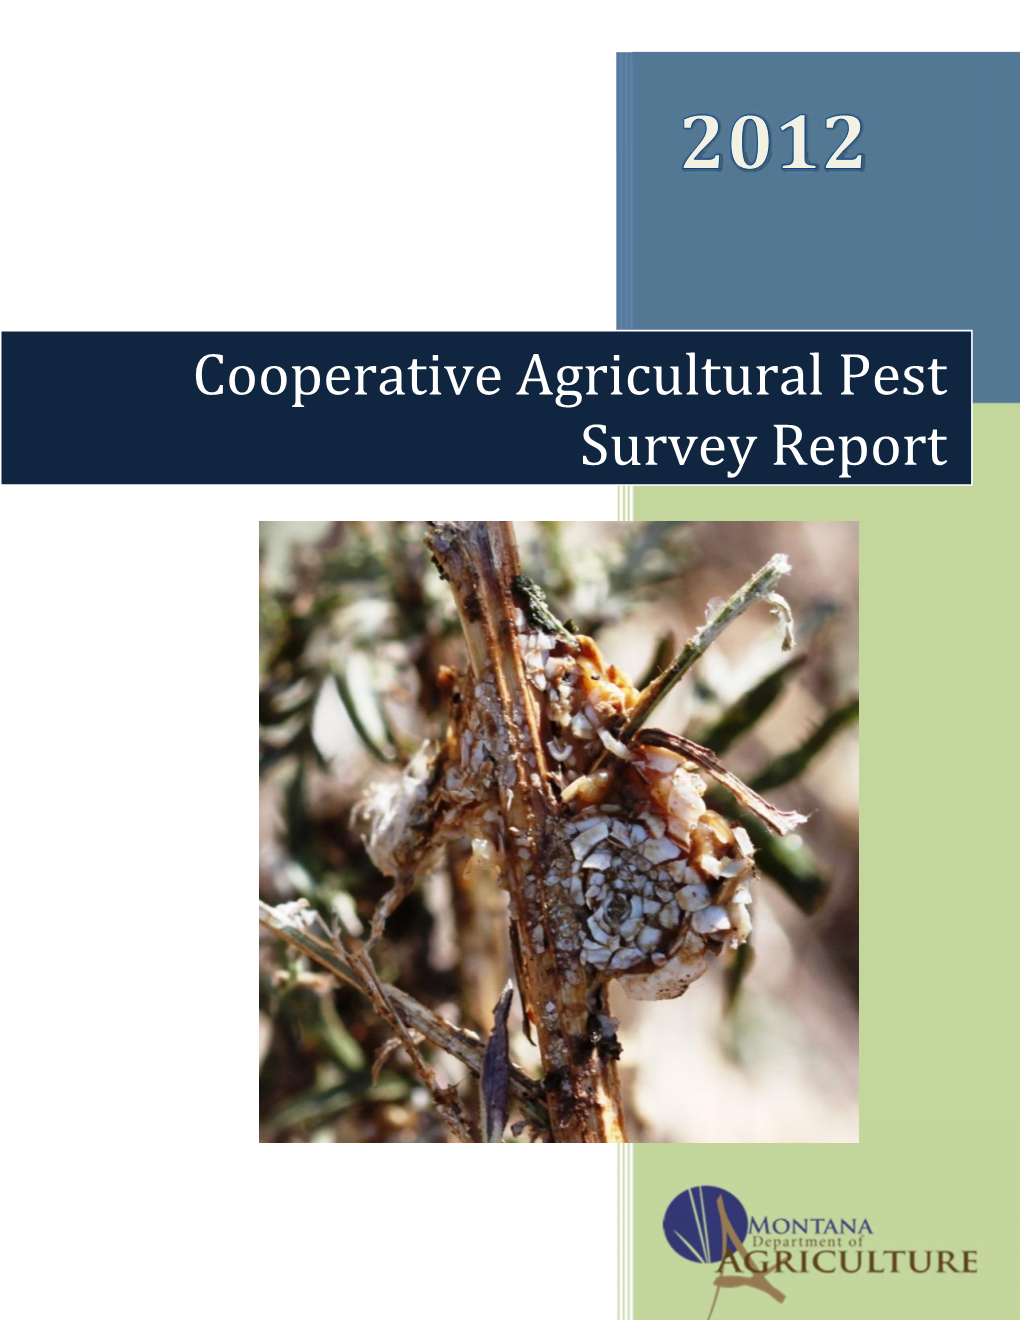 Cooperative Agricultural Pest Survey Report